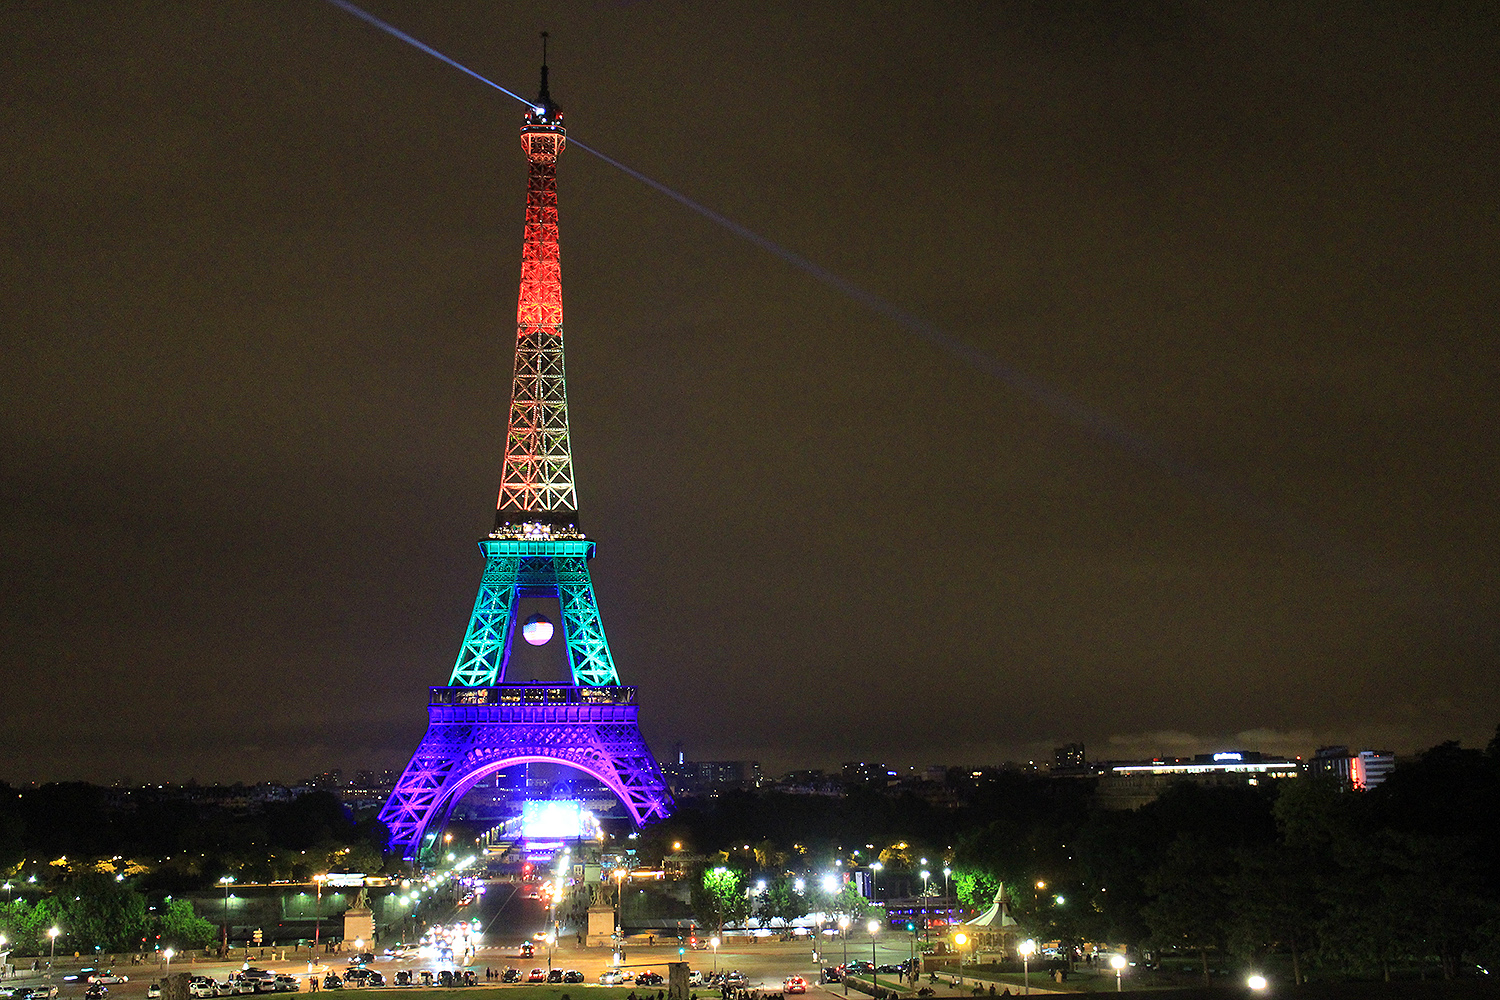 “Love is Love” by Julie Schwartz, ‘19 / Paris, France “I took this picture after the terrorist attacks in Orlando. The Eiffel Tower was lit up with the colors of the Rainbow flag in solidarity with the victims. From where I was standing, the view was breathtaking, and all I could see was how beautiful the tower looked with these colors. Some people around me were singing and lighting candles: they made me feel very hopeful for a better future. When terrible events like the one of Orlando happen, I remember this feeling I had when looking at the tower and I find hope again.”